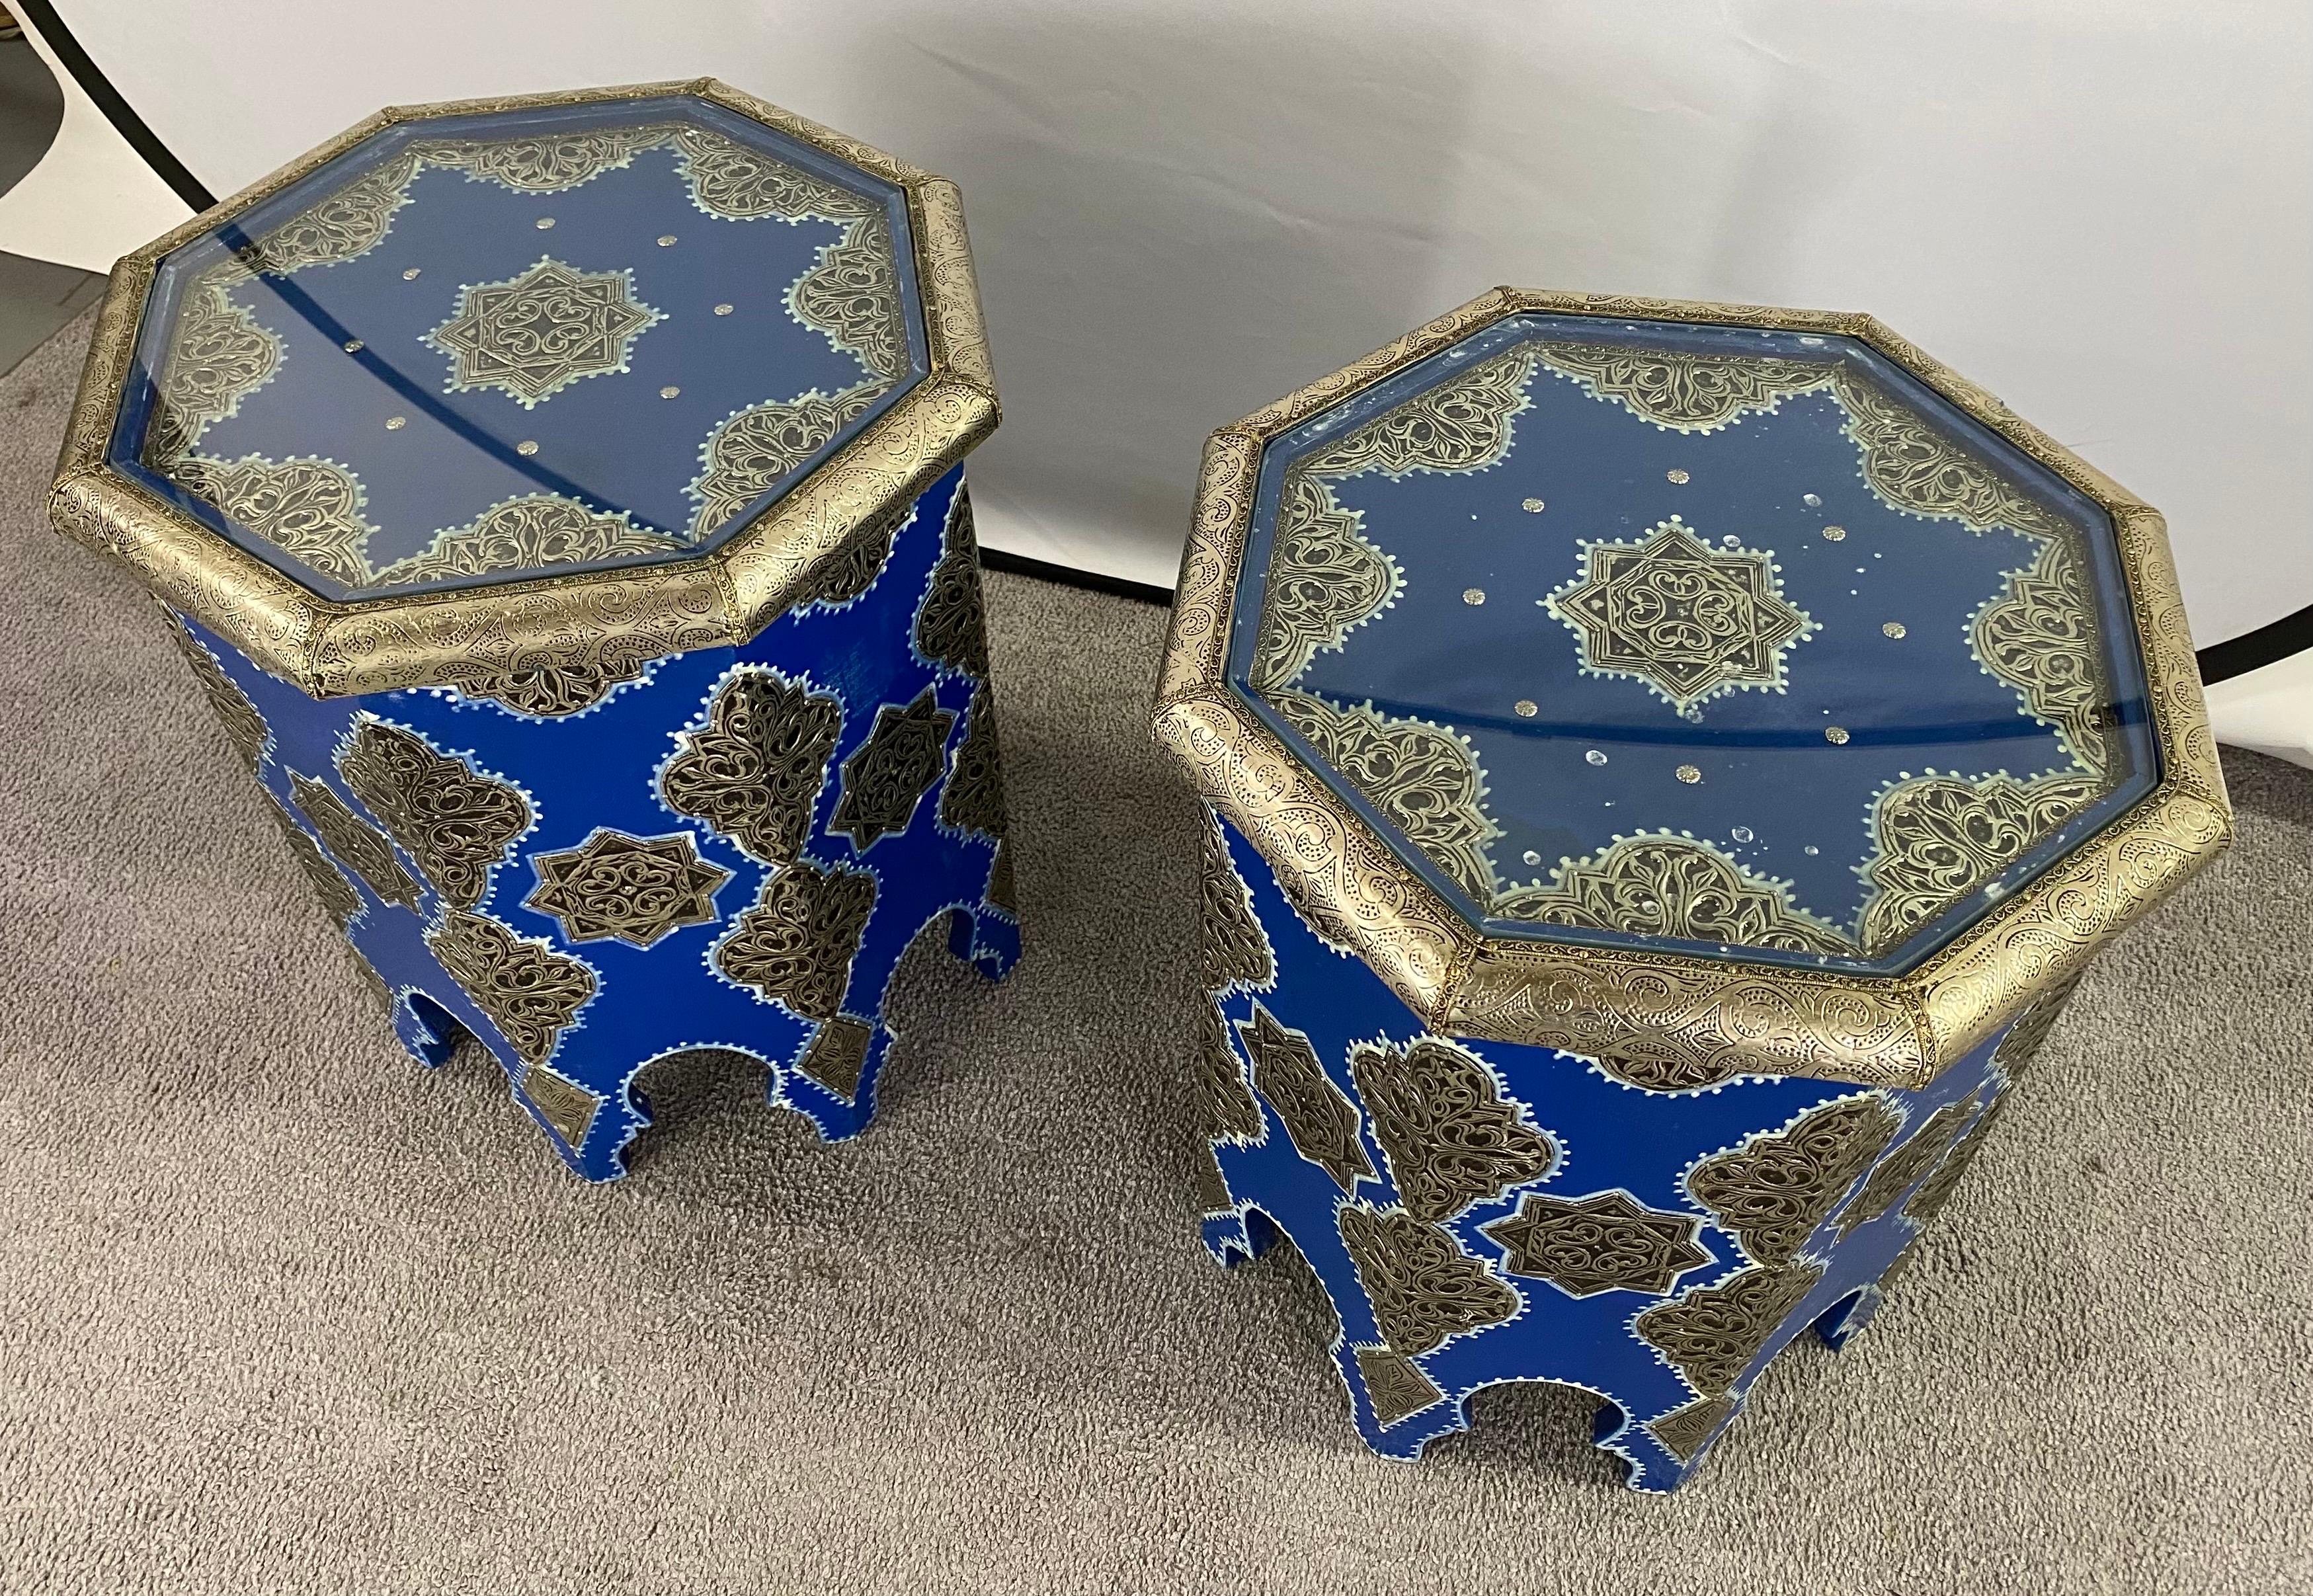 The pair of Moroccan boho chic white brass inlaid side tables in blue Majorelle is inspired by the legendary Yves Saint Laurent majorette garden in Marrakech. This charming octagonal shaped side table will add unique style and sophistication to any